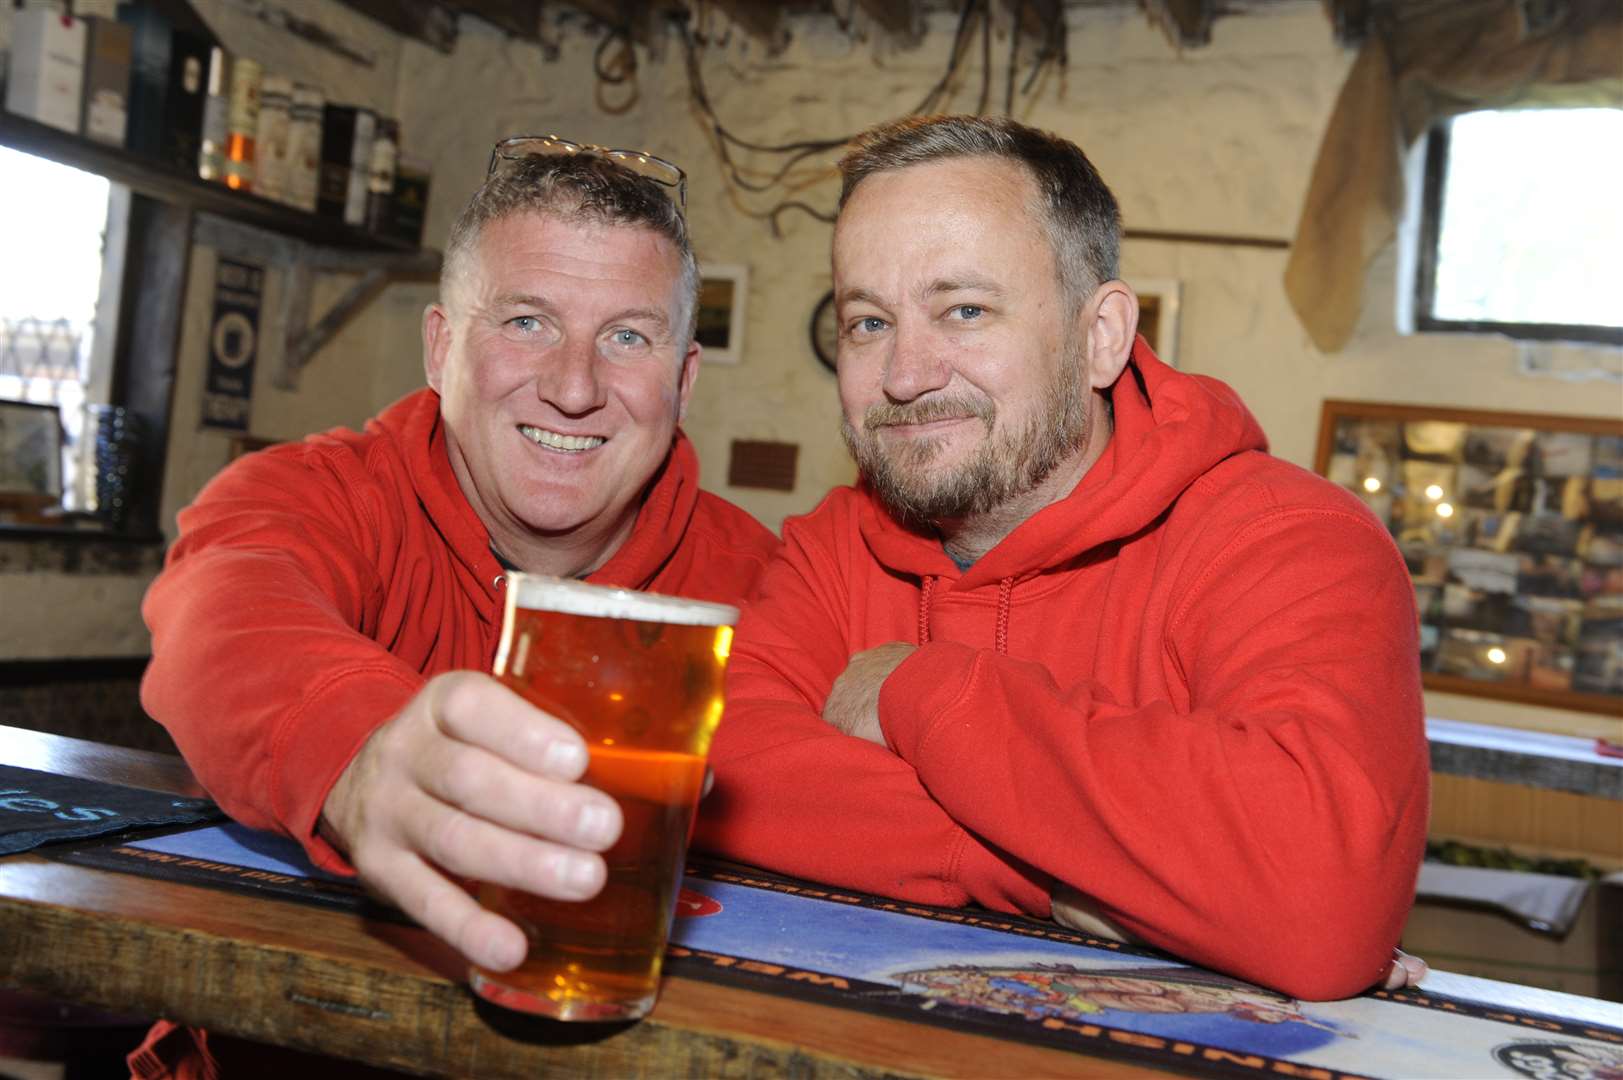 Shawn Galvin and Ian Noble are delighted the Yard of Ale has been named Kent Pub of the Year by CAMRA